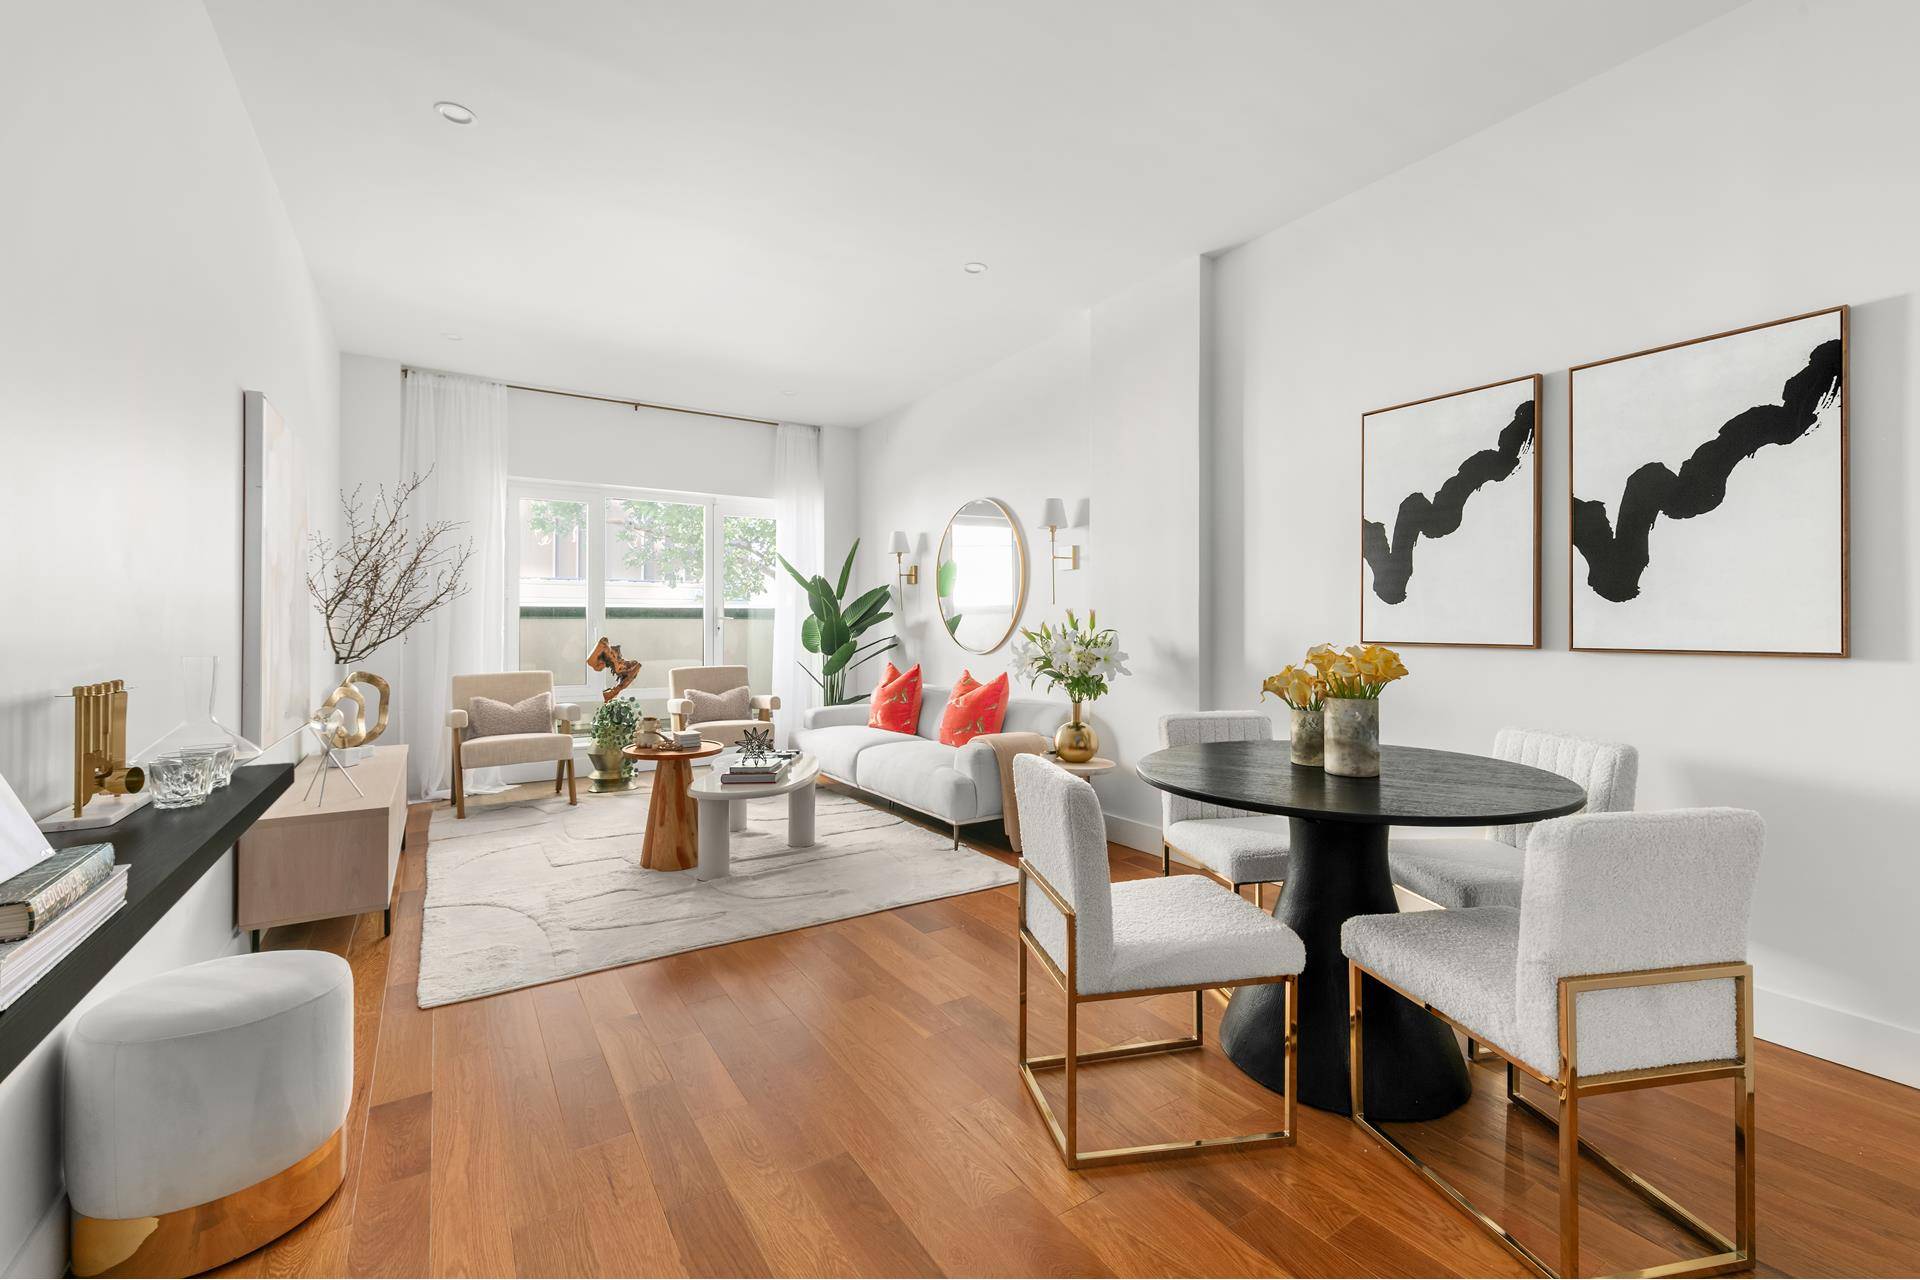 Introducing 2B at 427 E 90th Street A luminous amp ; oversized 2 bed, 2 bath apartment with 2 private balconies at Gracie Green, a stunning new development in a ...